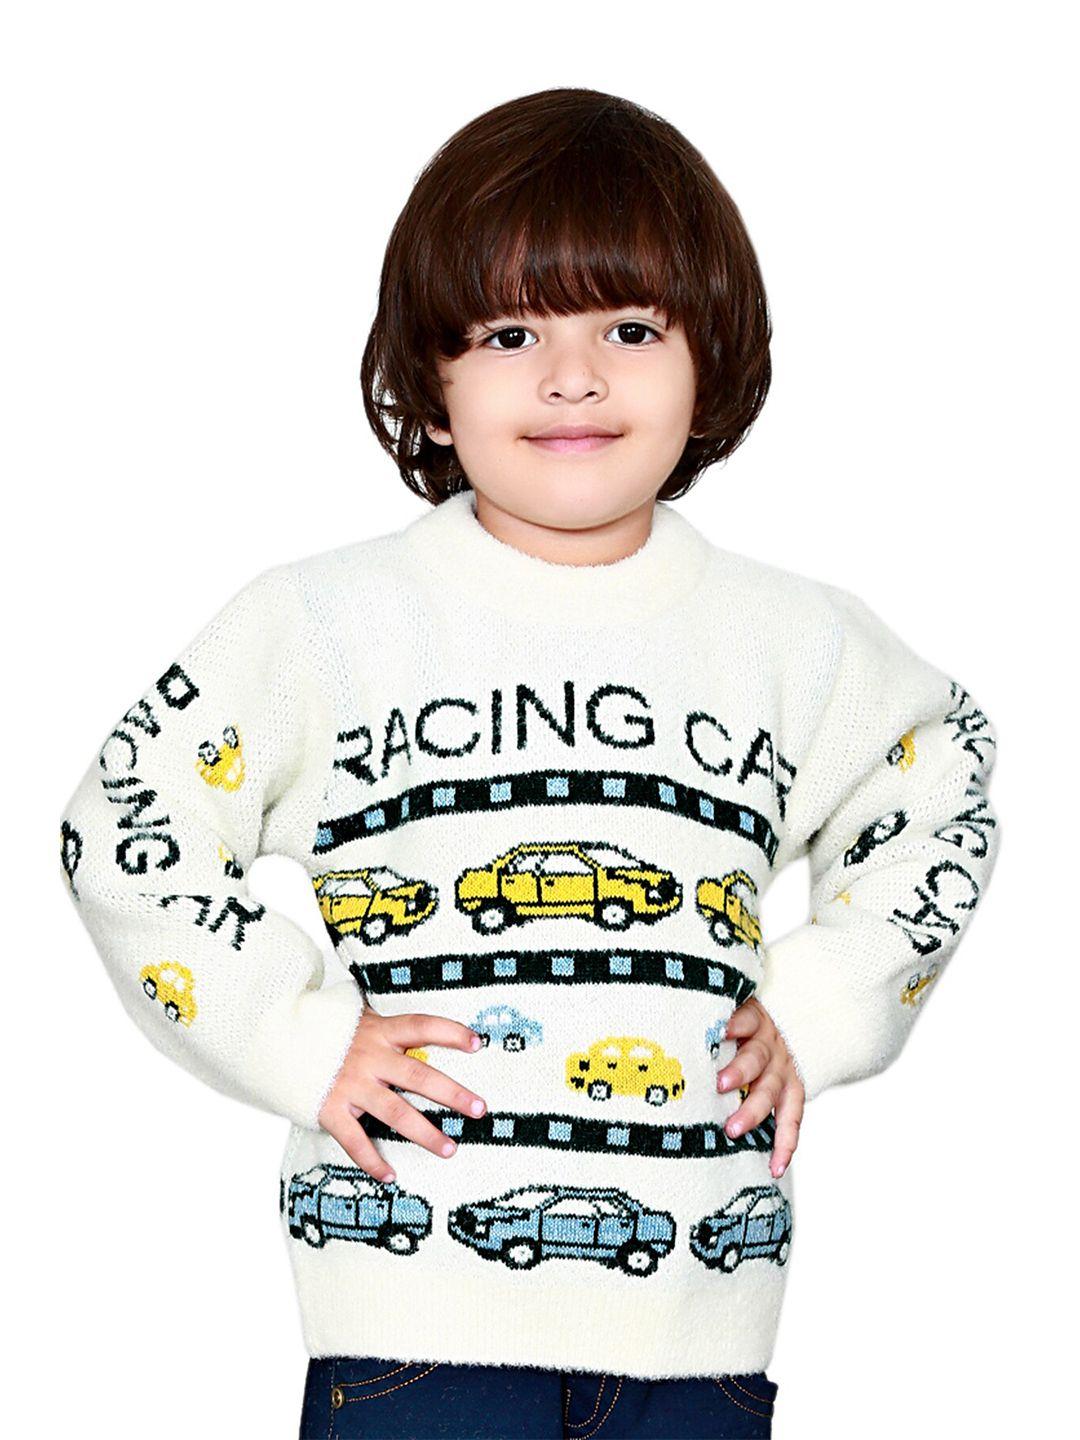 baesd kids conversational printed round neck acrylic pullover sweater